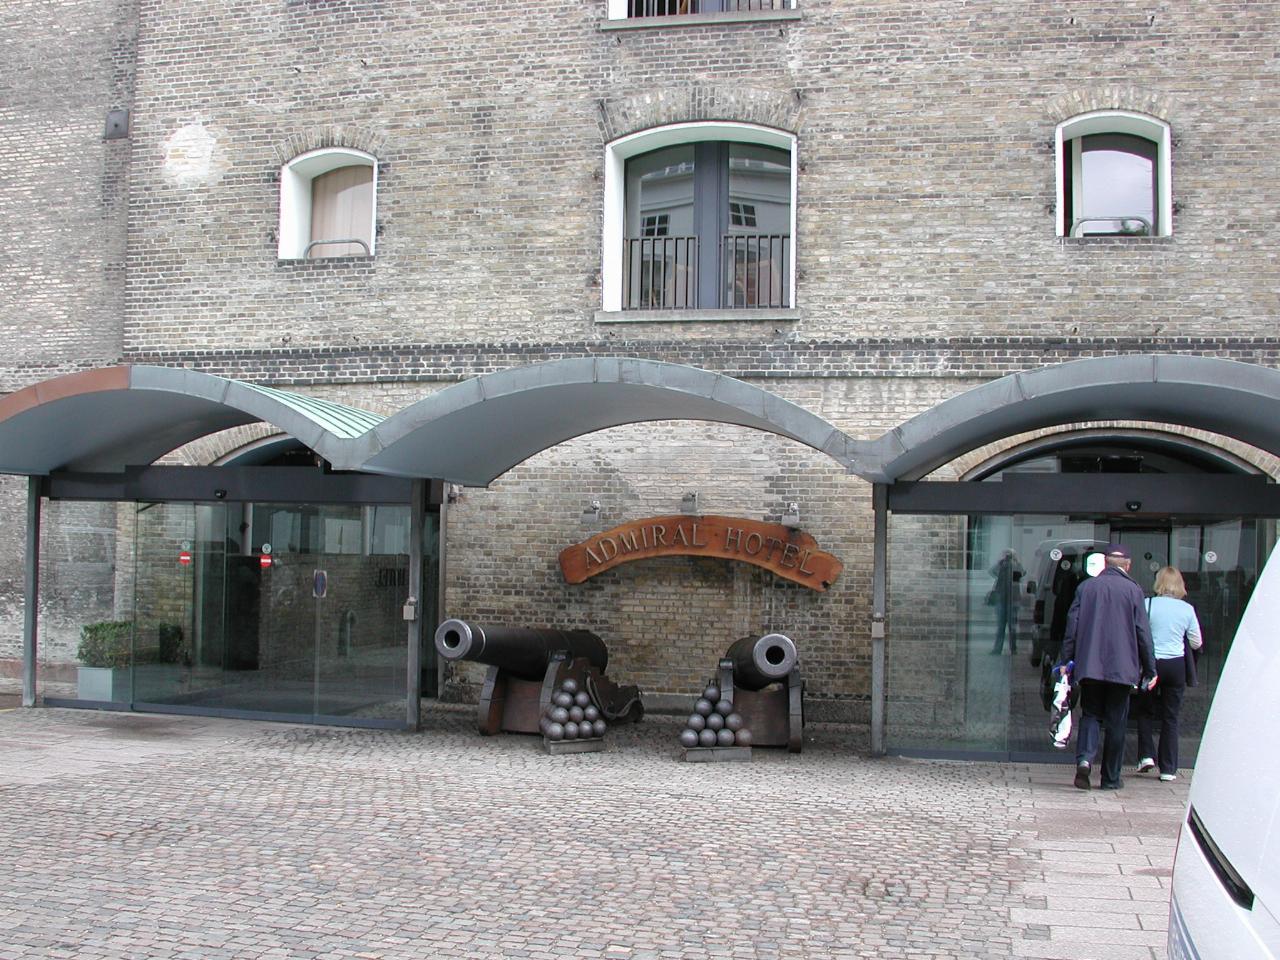 KPLU Viking Jazz: Entrance to Admiral Hotel, where we stayed in Copenhagen.  My room was above the window on left